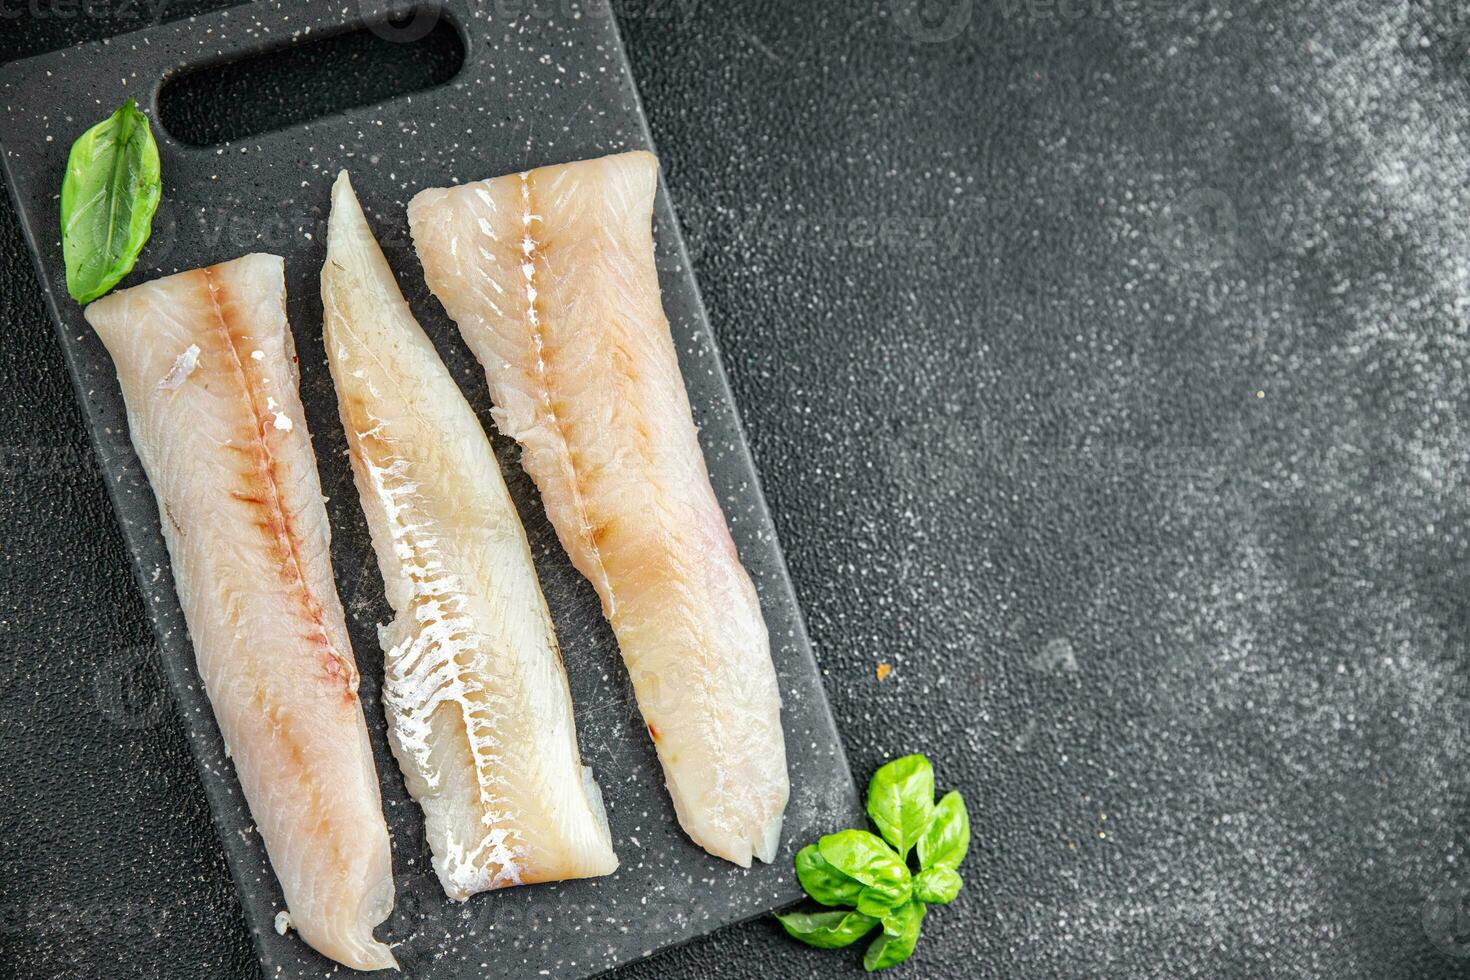 blue whiting fish fillet fresh seafood healthy eating cooking appetizer meal food snack on the table copy space food background rustic top view photo